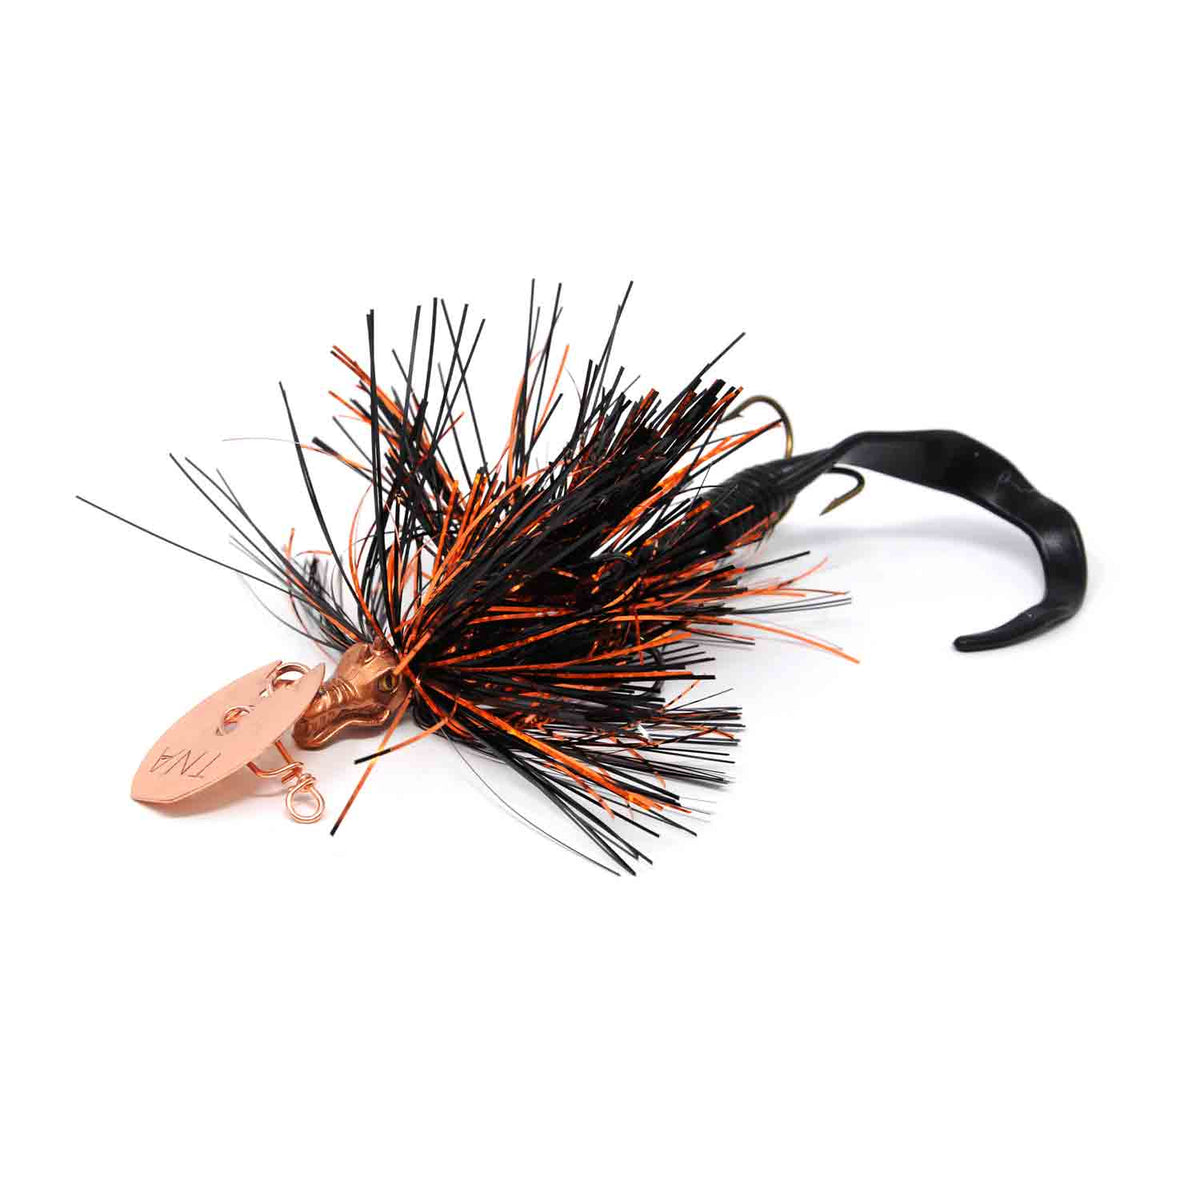 TnA Tackle The Micro Angry Dragon Flash Short Coppertone Chatterbaits